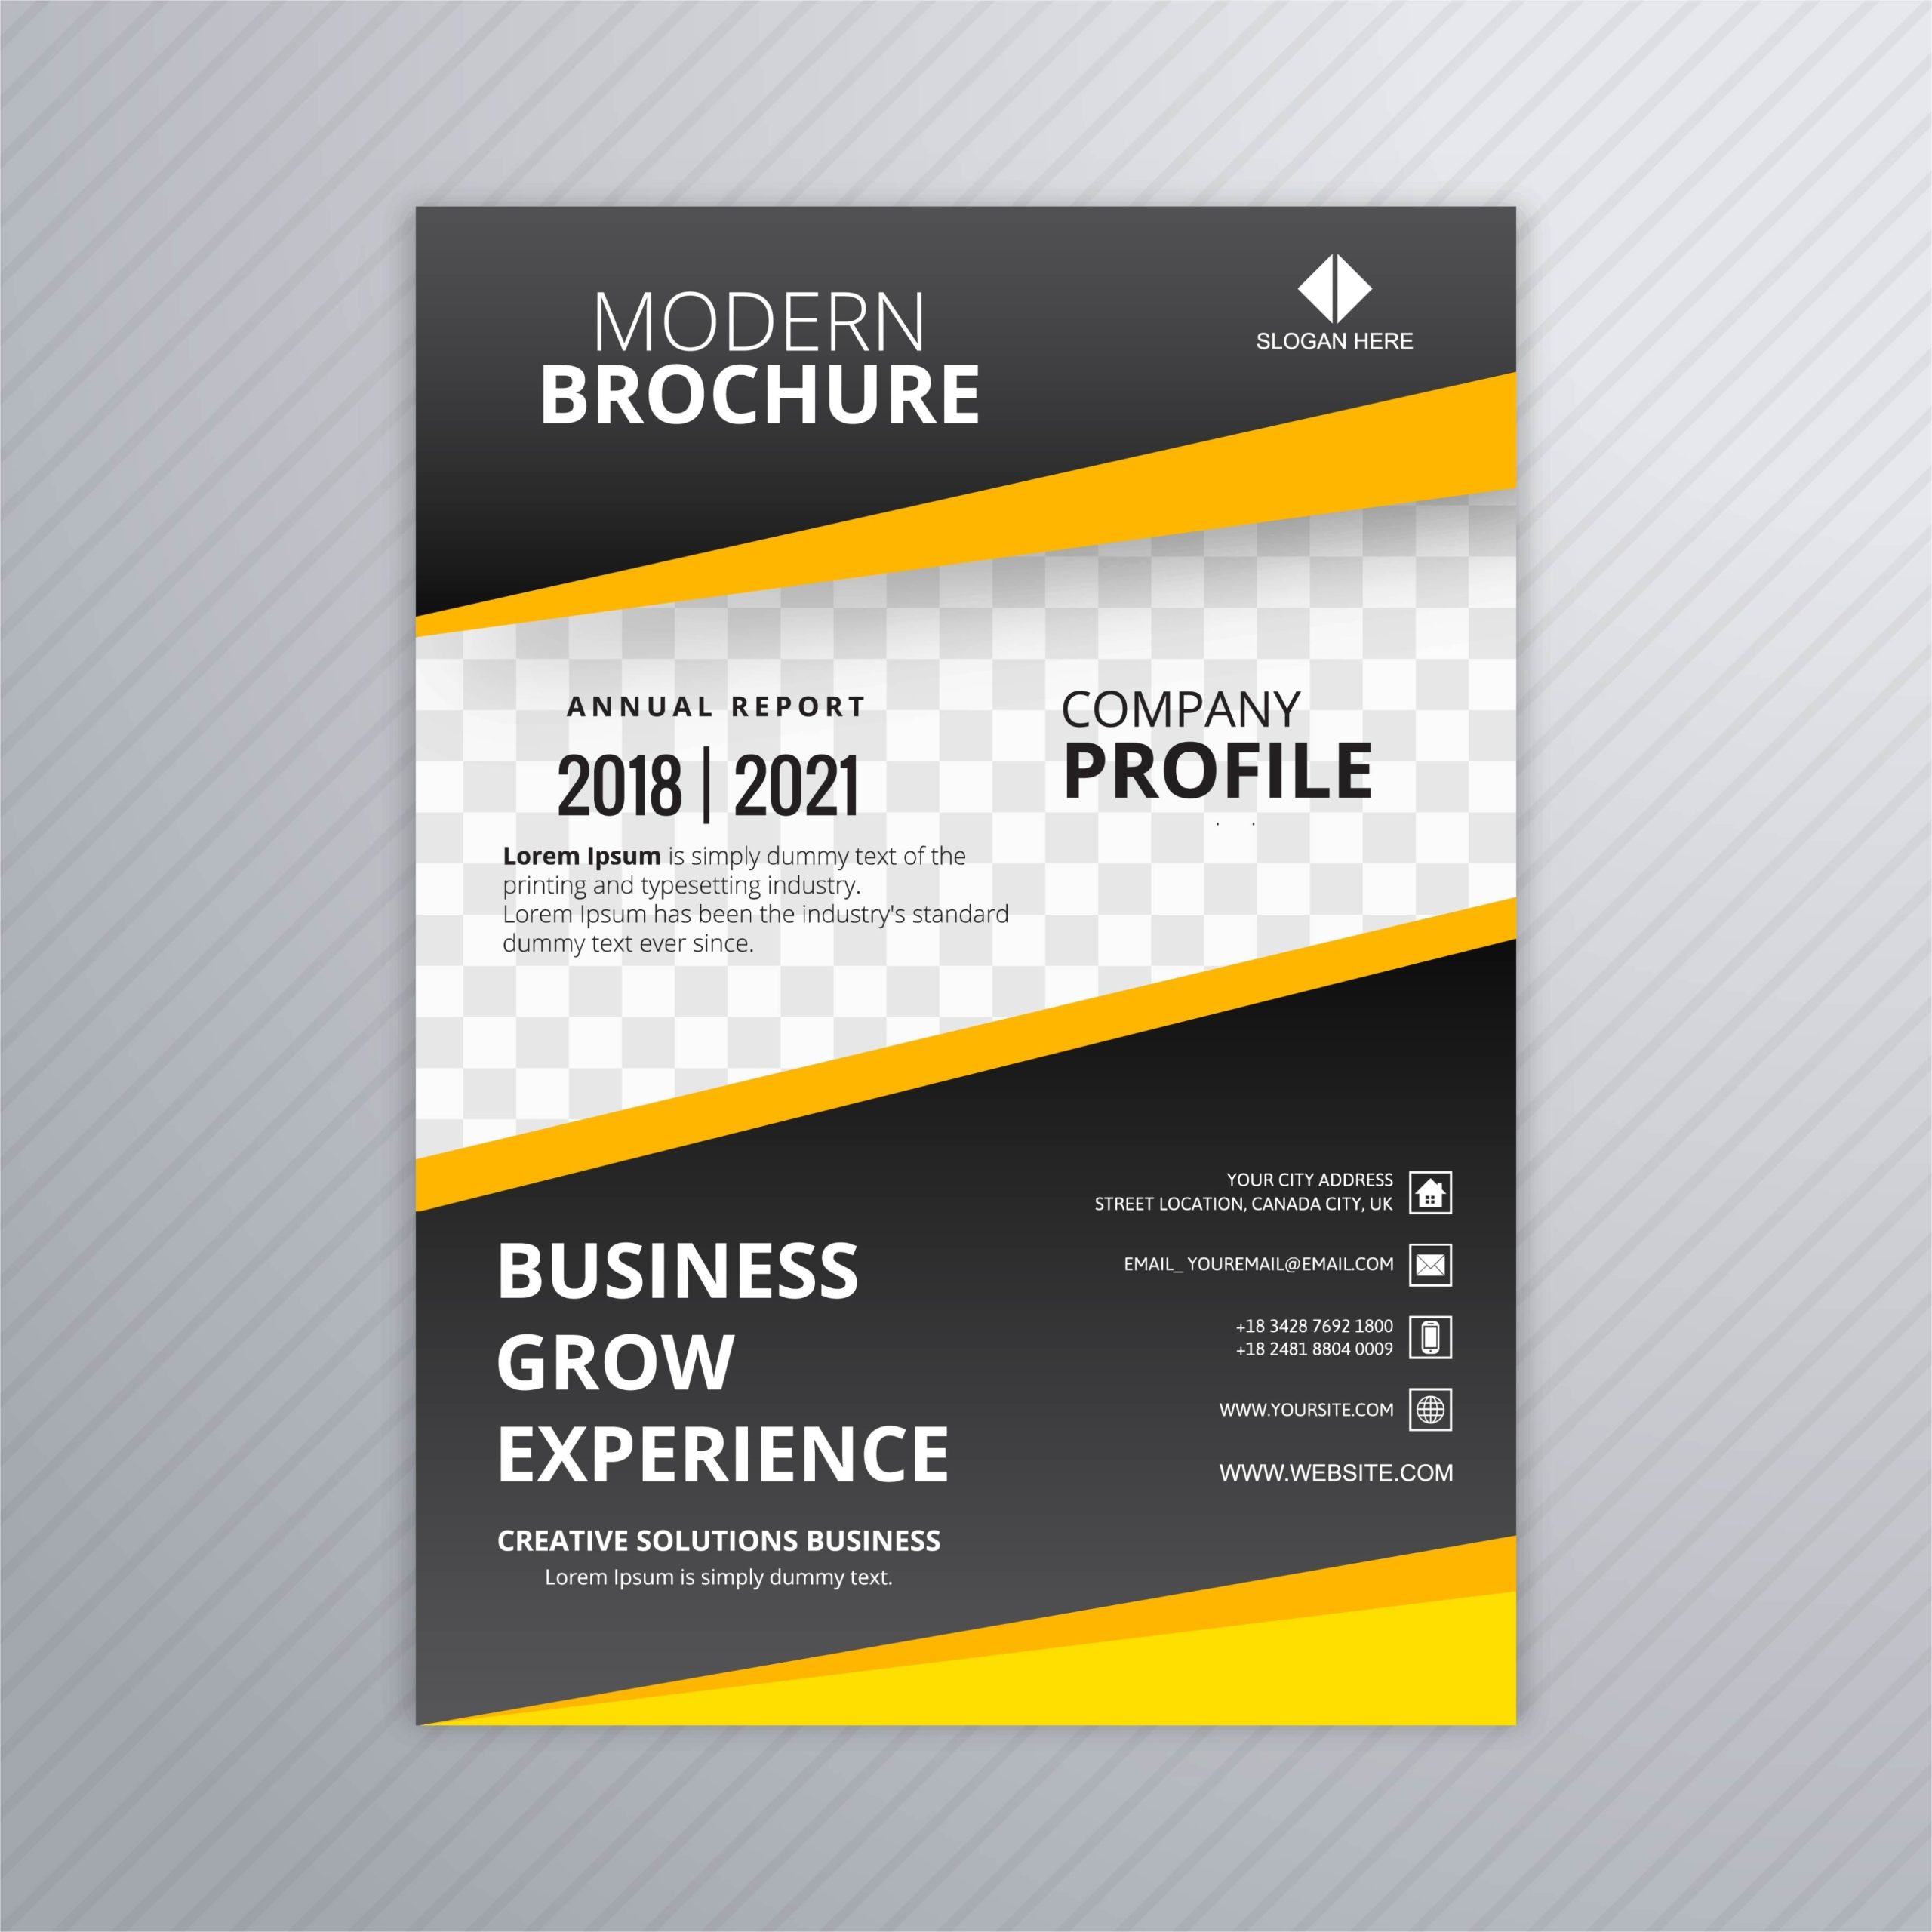 Modern Business Brochure Template Professional Design Illustrati 258576 Intended For Designs For Flyers Template